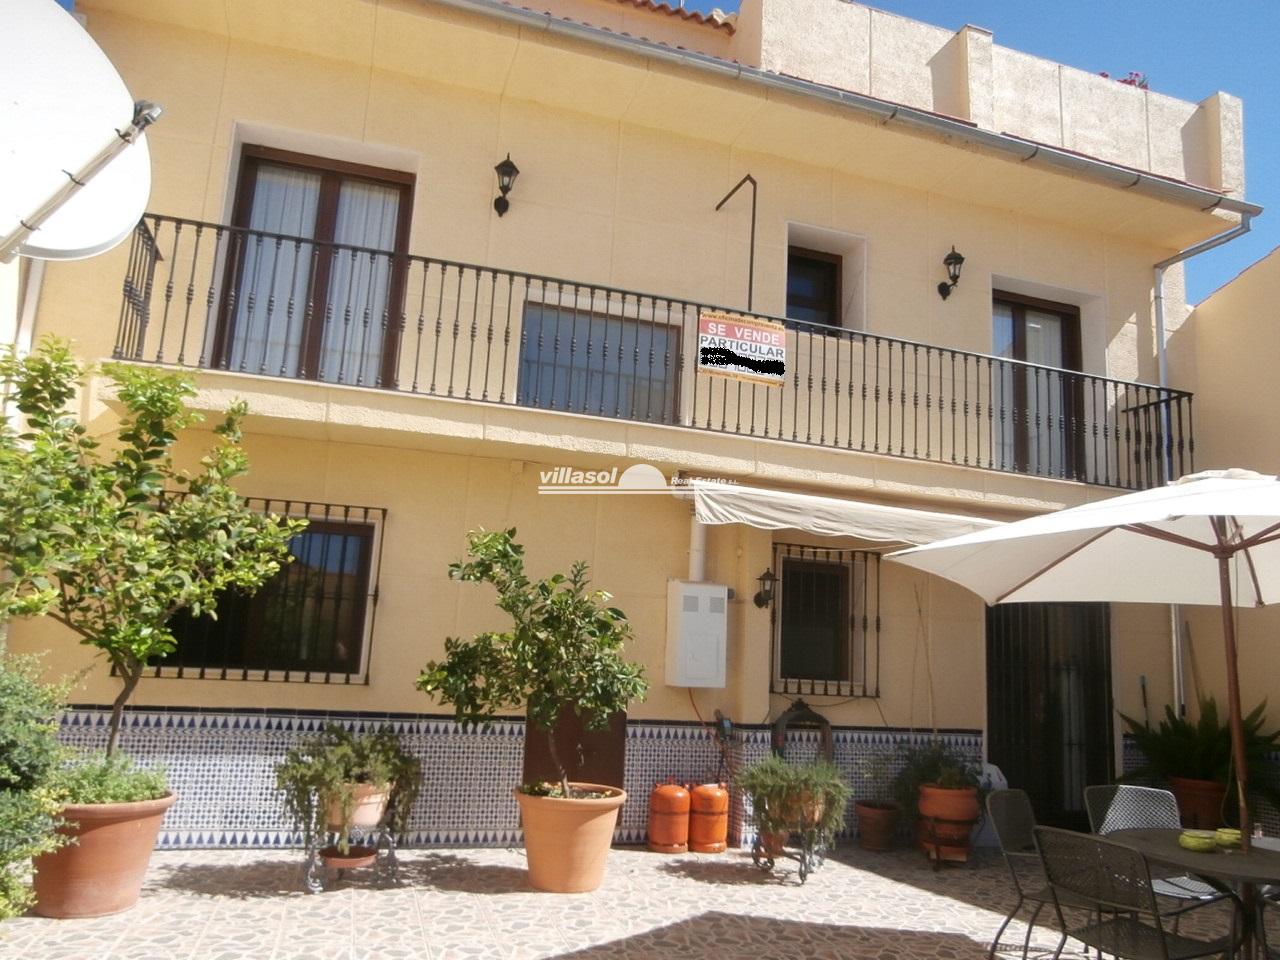 Townhouse for sale in Antequera, Málaga, Spain